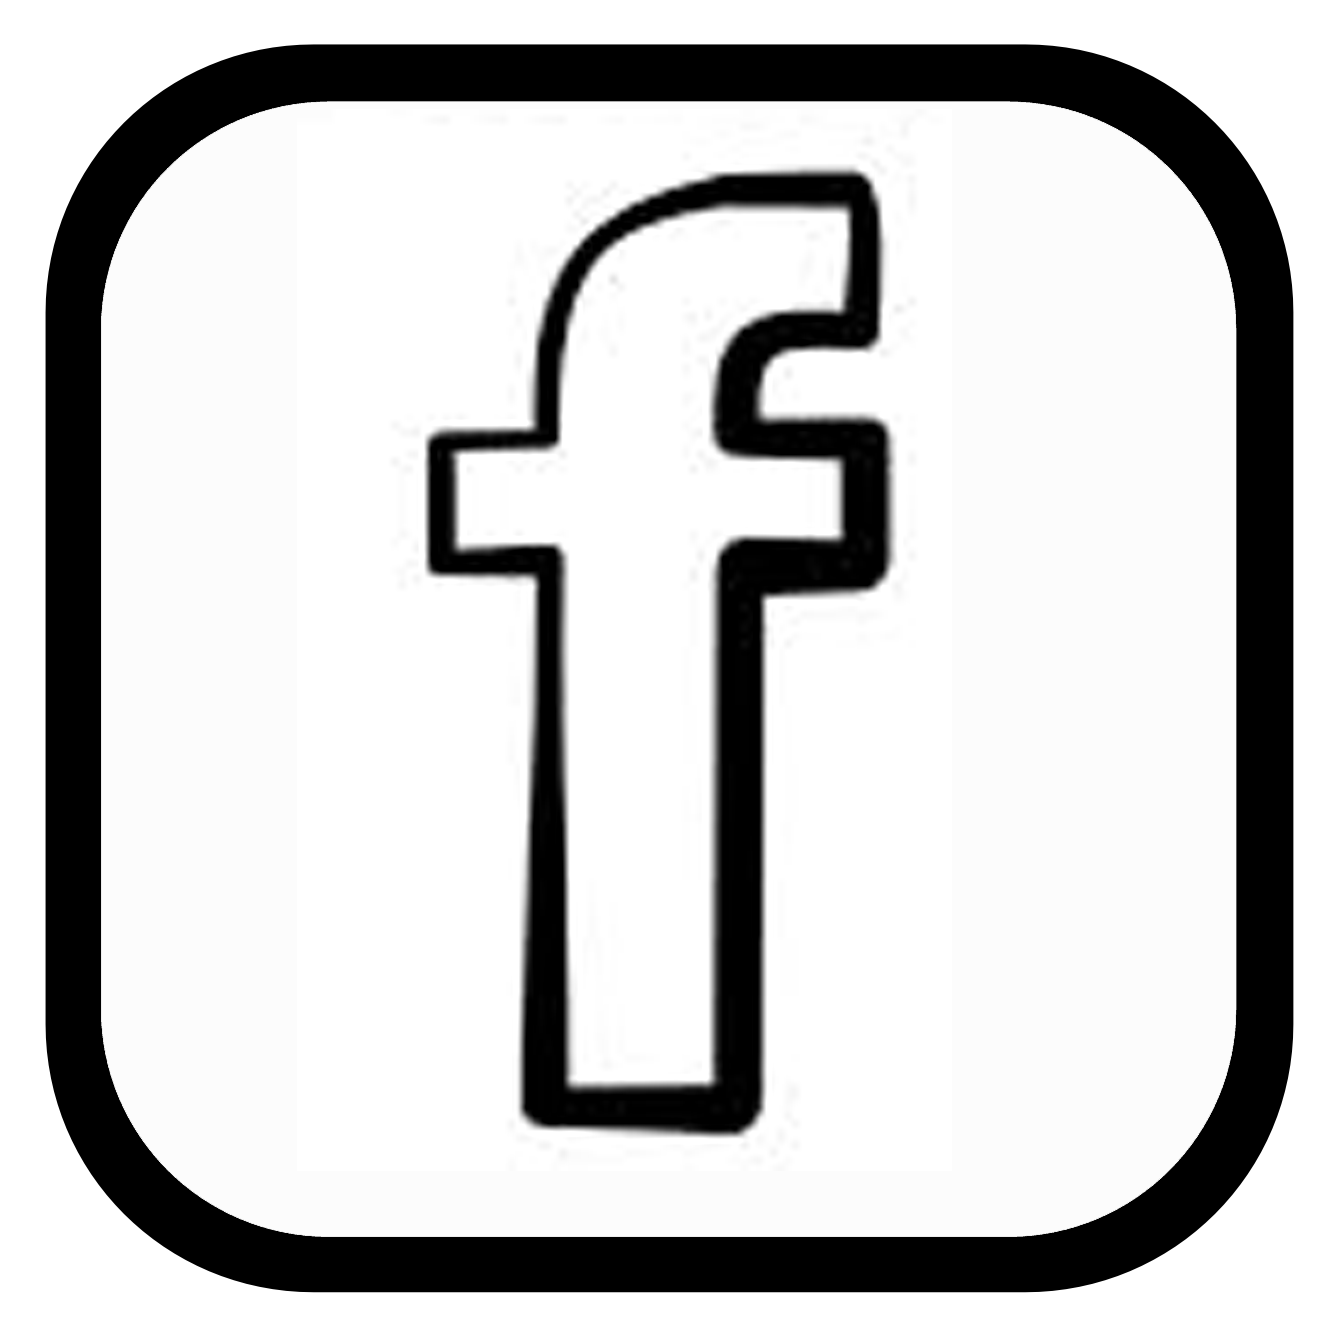 Facebook Icon Black and White